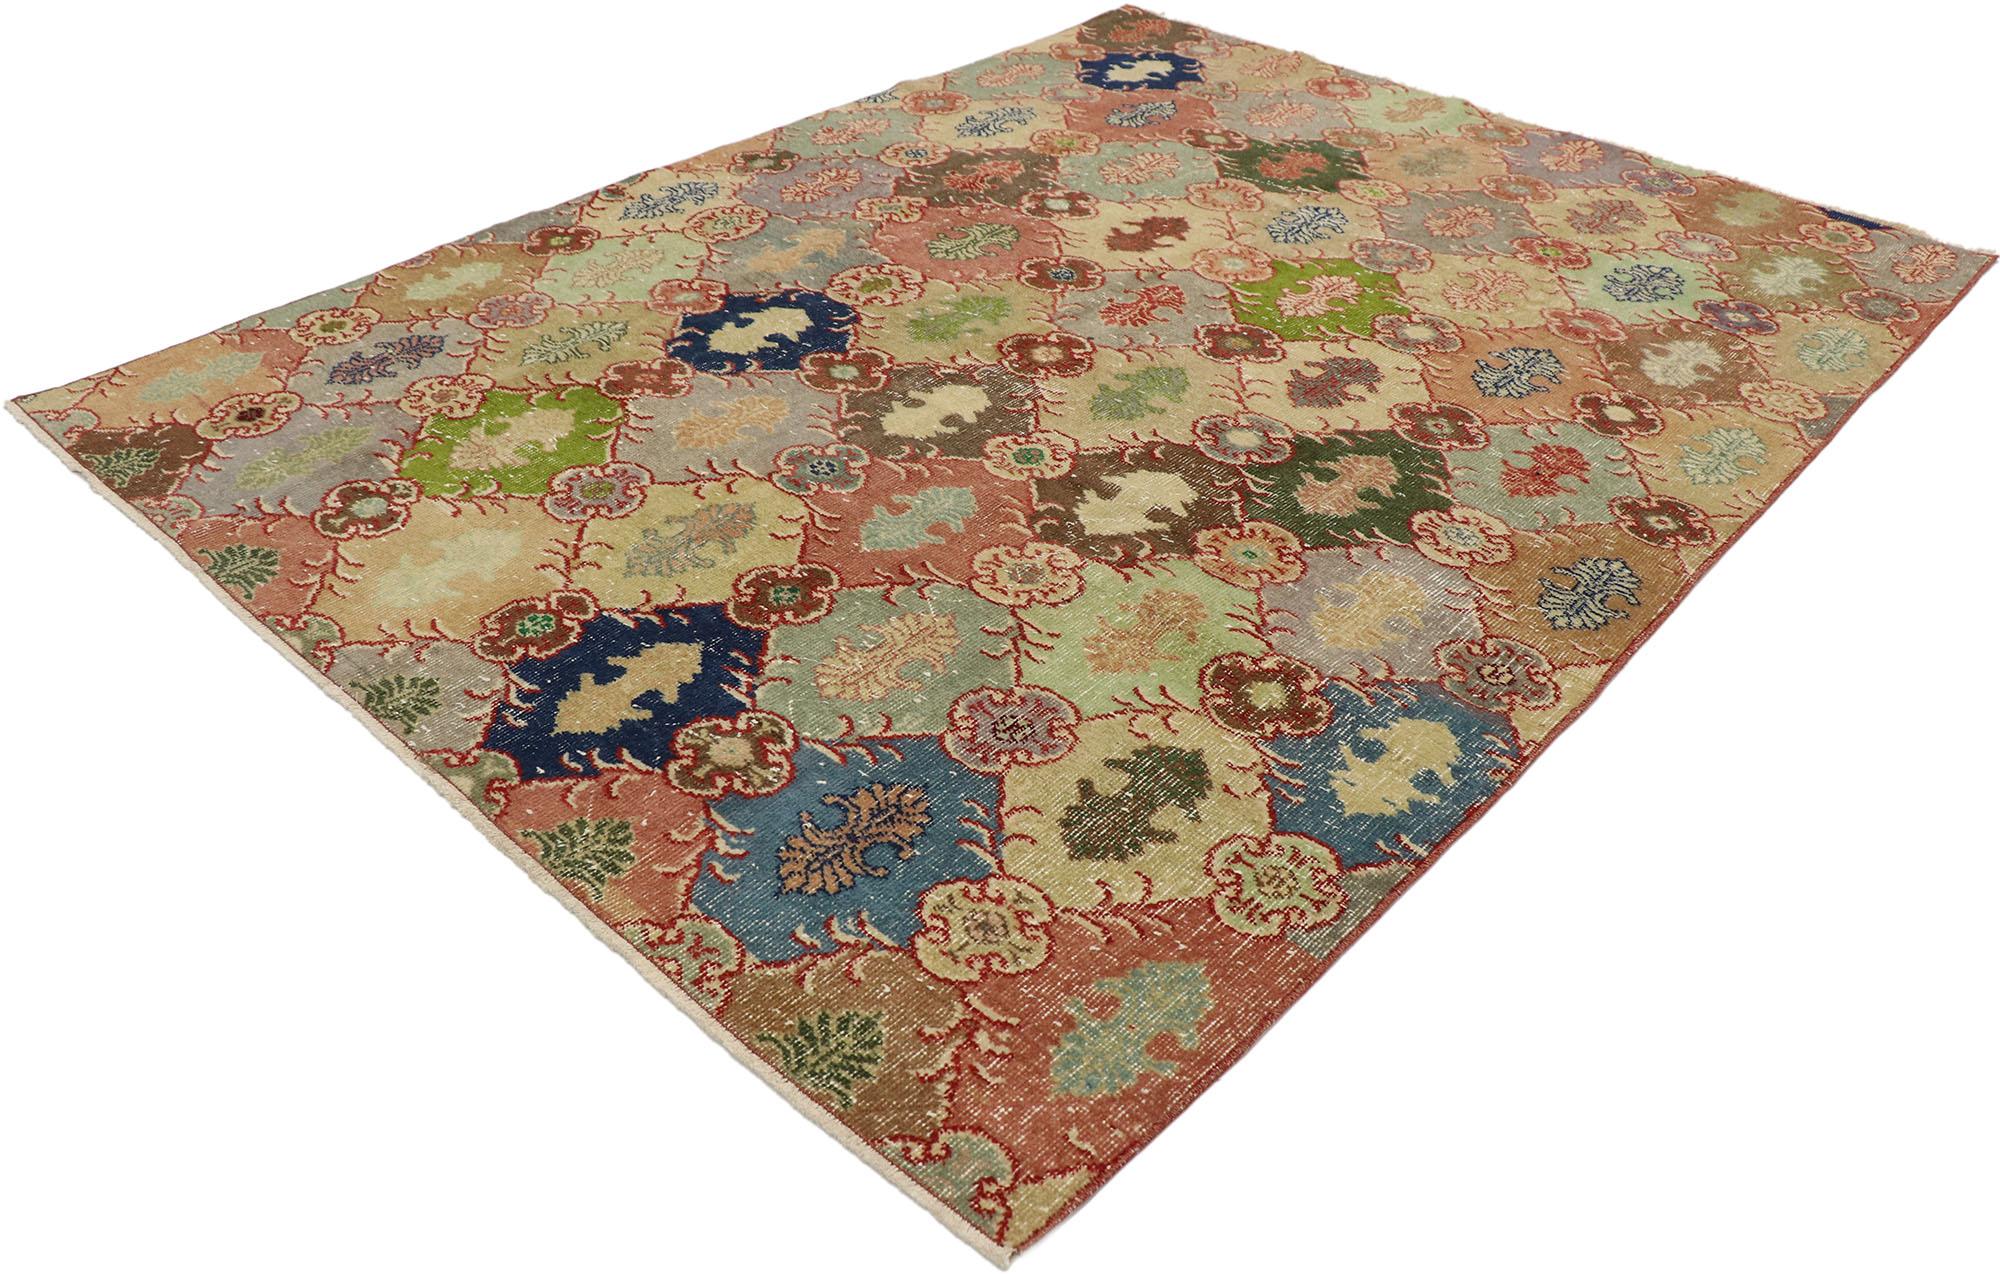 53227 Zeki Muren distressed vintage Turkish Sivas rug with rustic Arts & Crafts style. Displaying well-balanced asymmetry and bold geometric shapes in vibrant earth-tone colors, this hand knotted wool vintage Turkish Sivas rug beautifully embodies